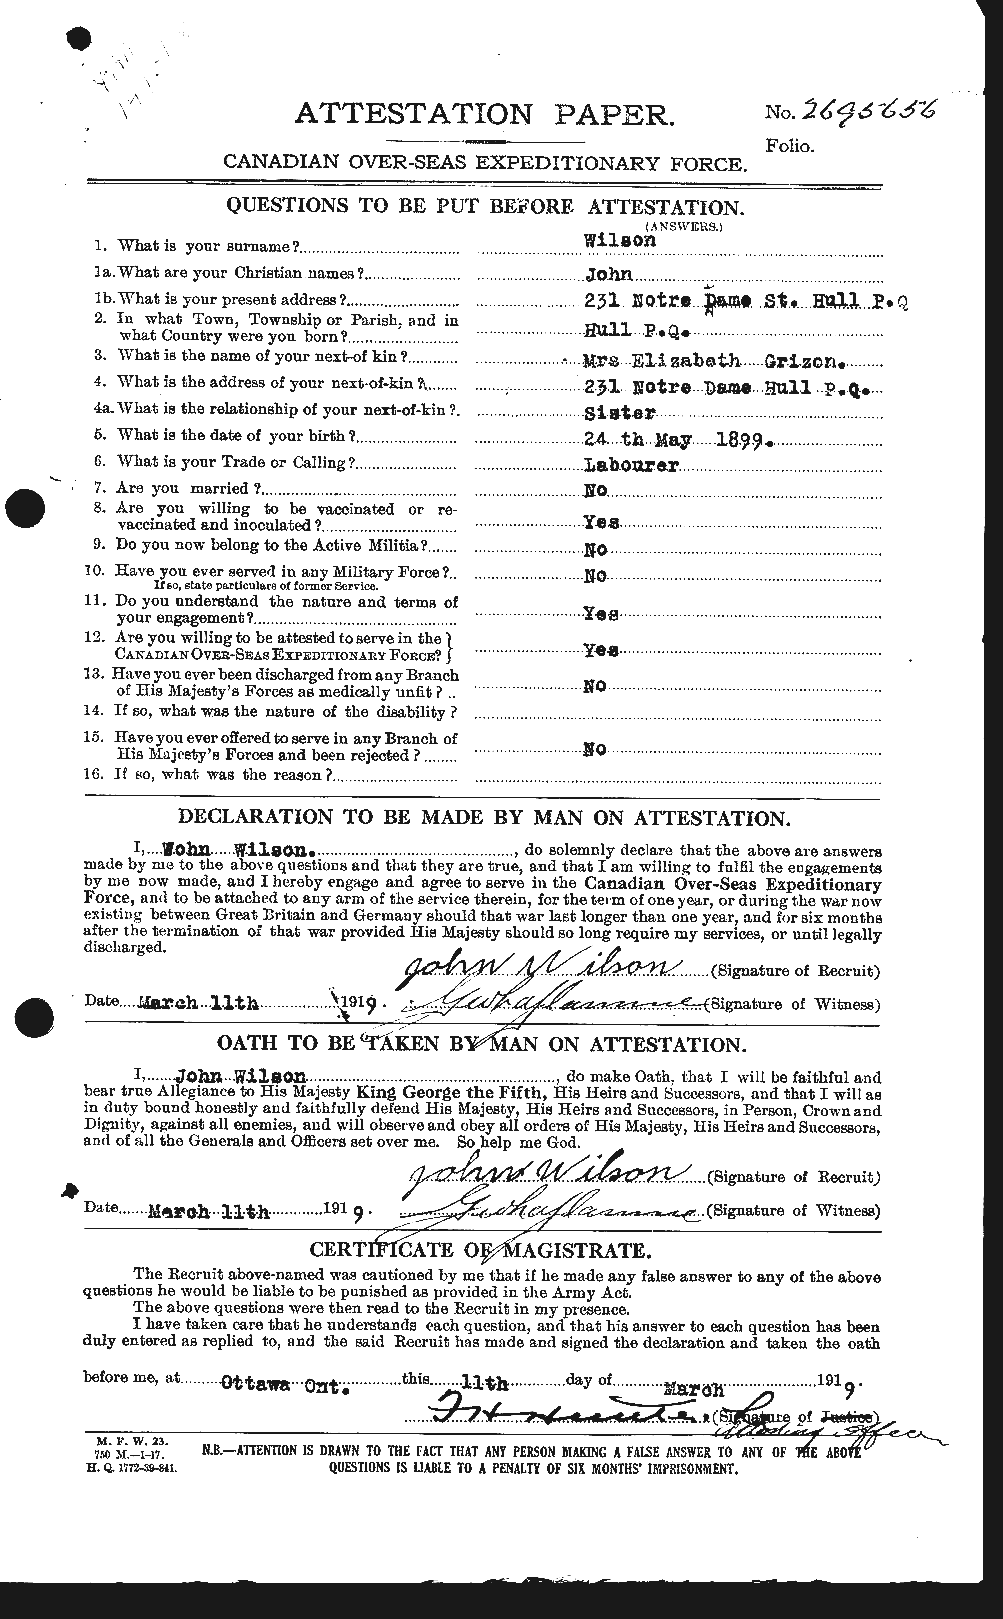 Personnel Records of the First World War - CEF 681616a